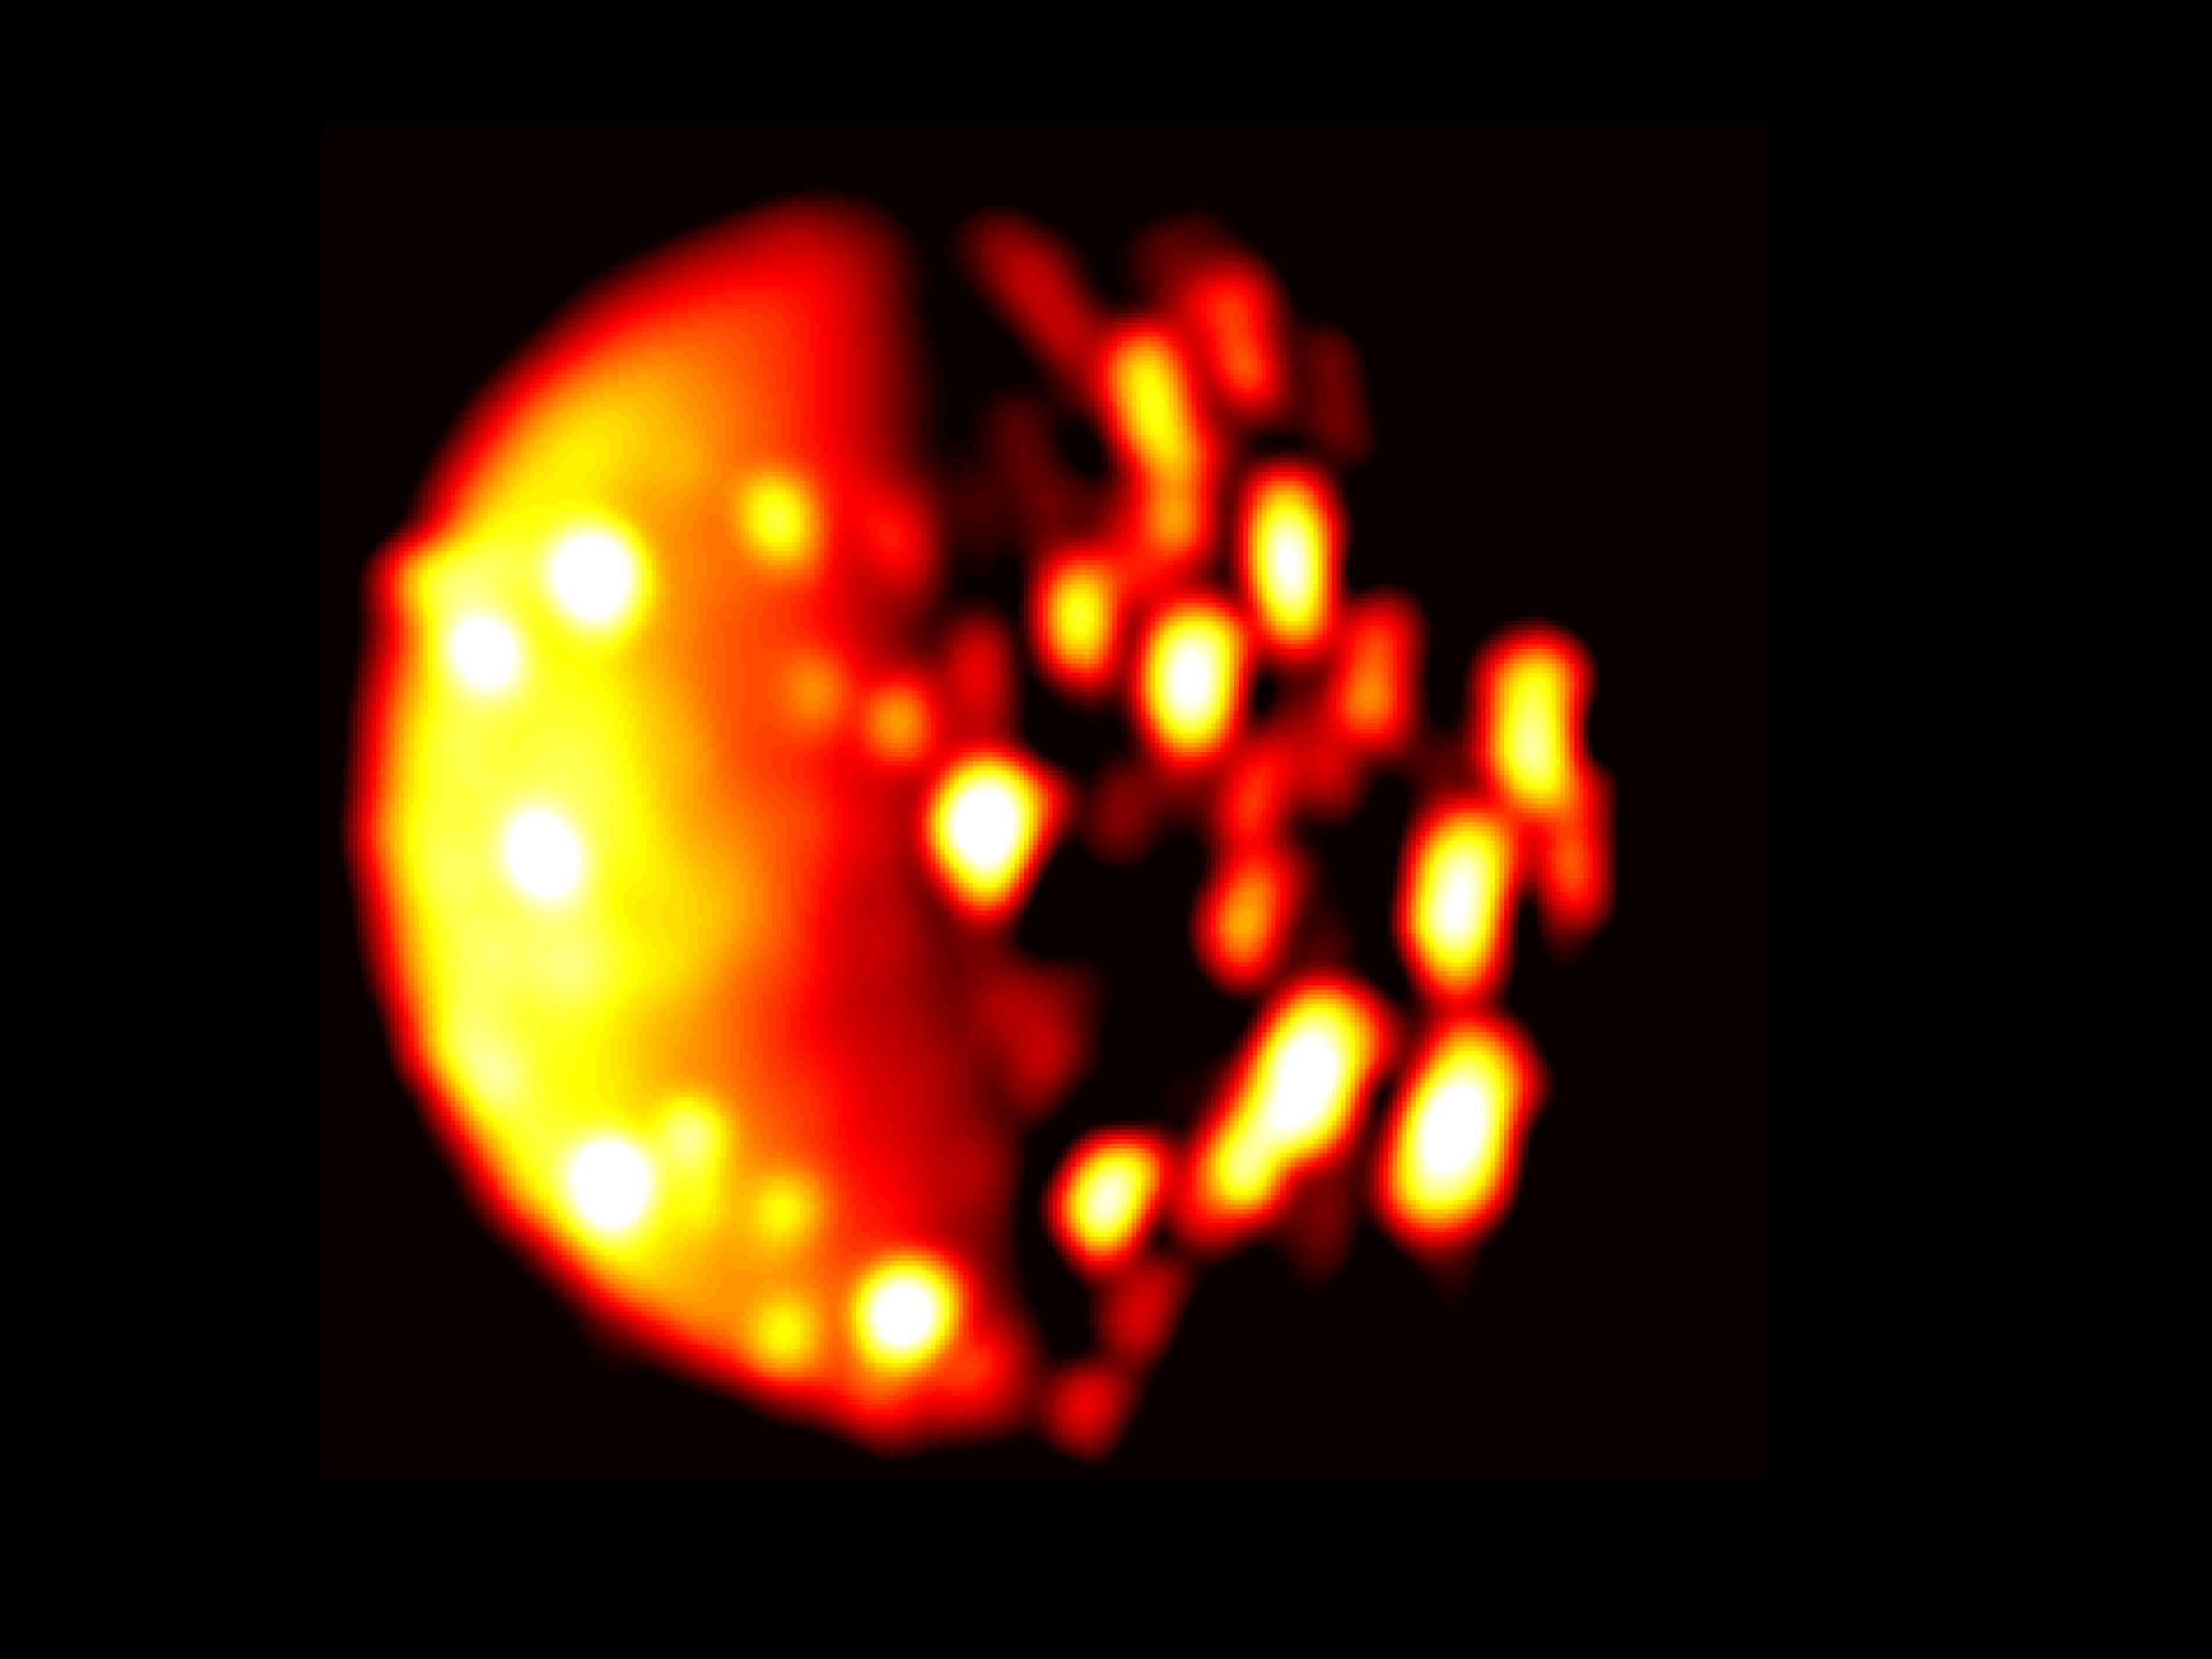 PIA22599: Jupiter Moon Io in Infrared